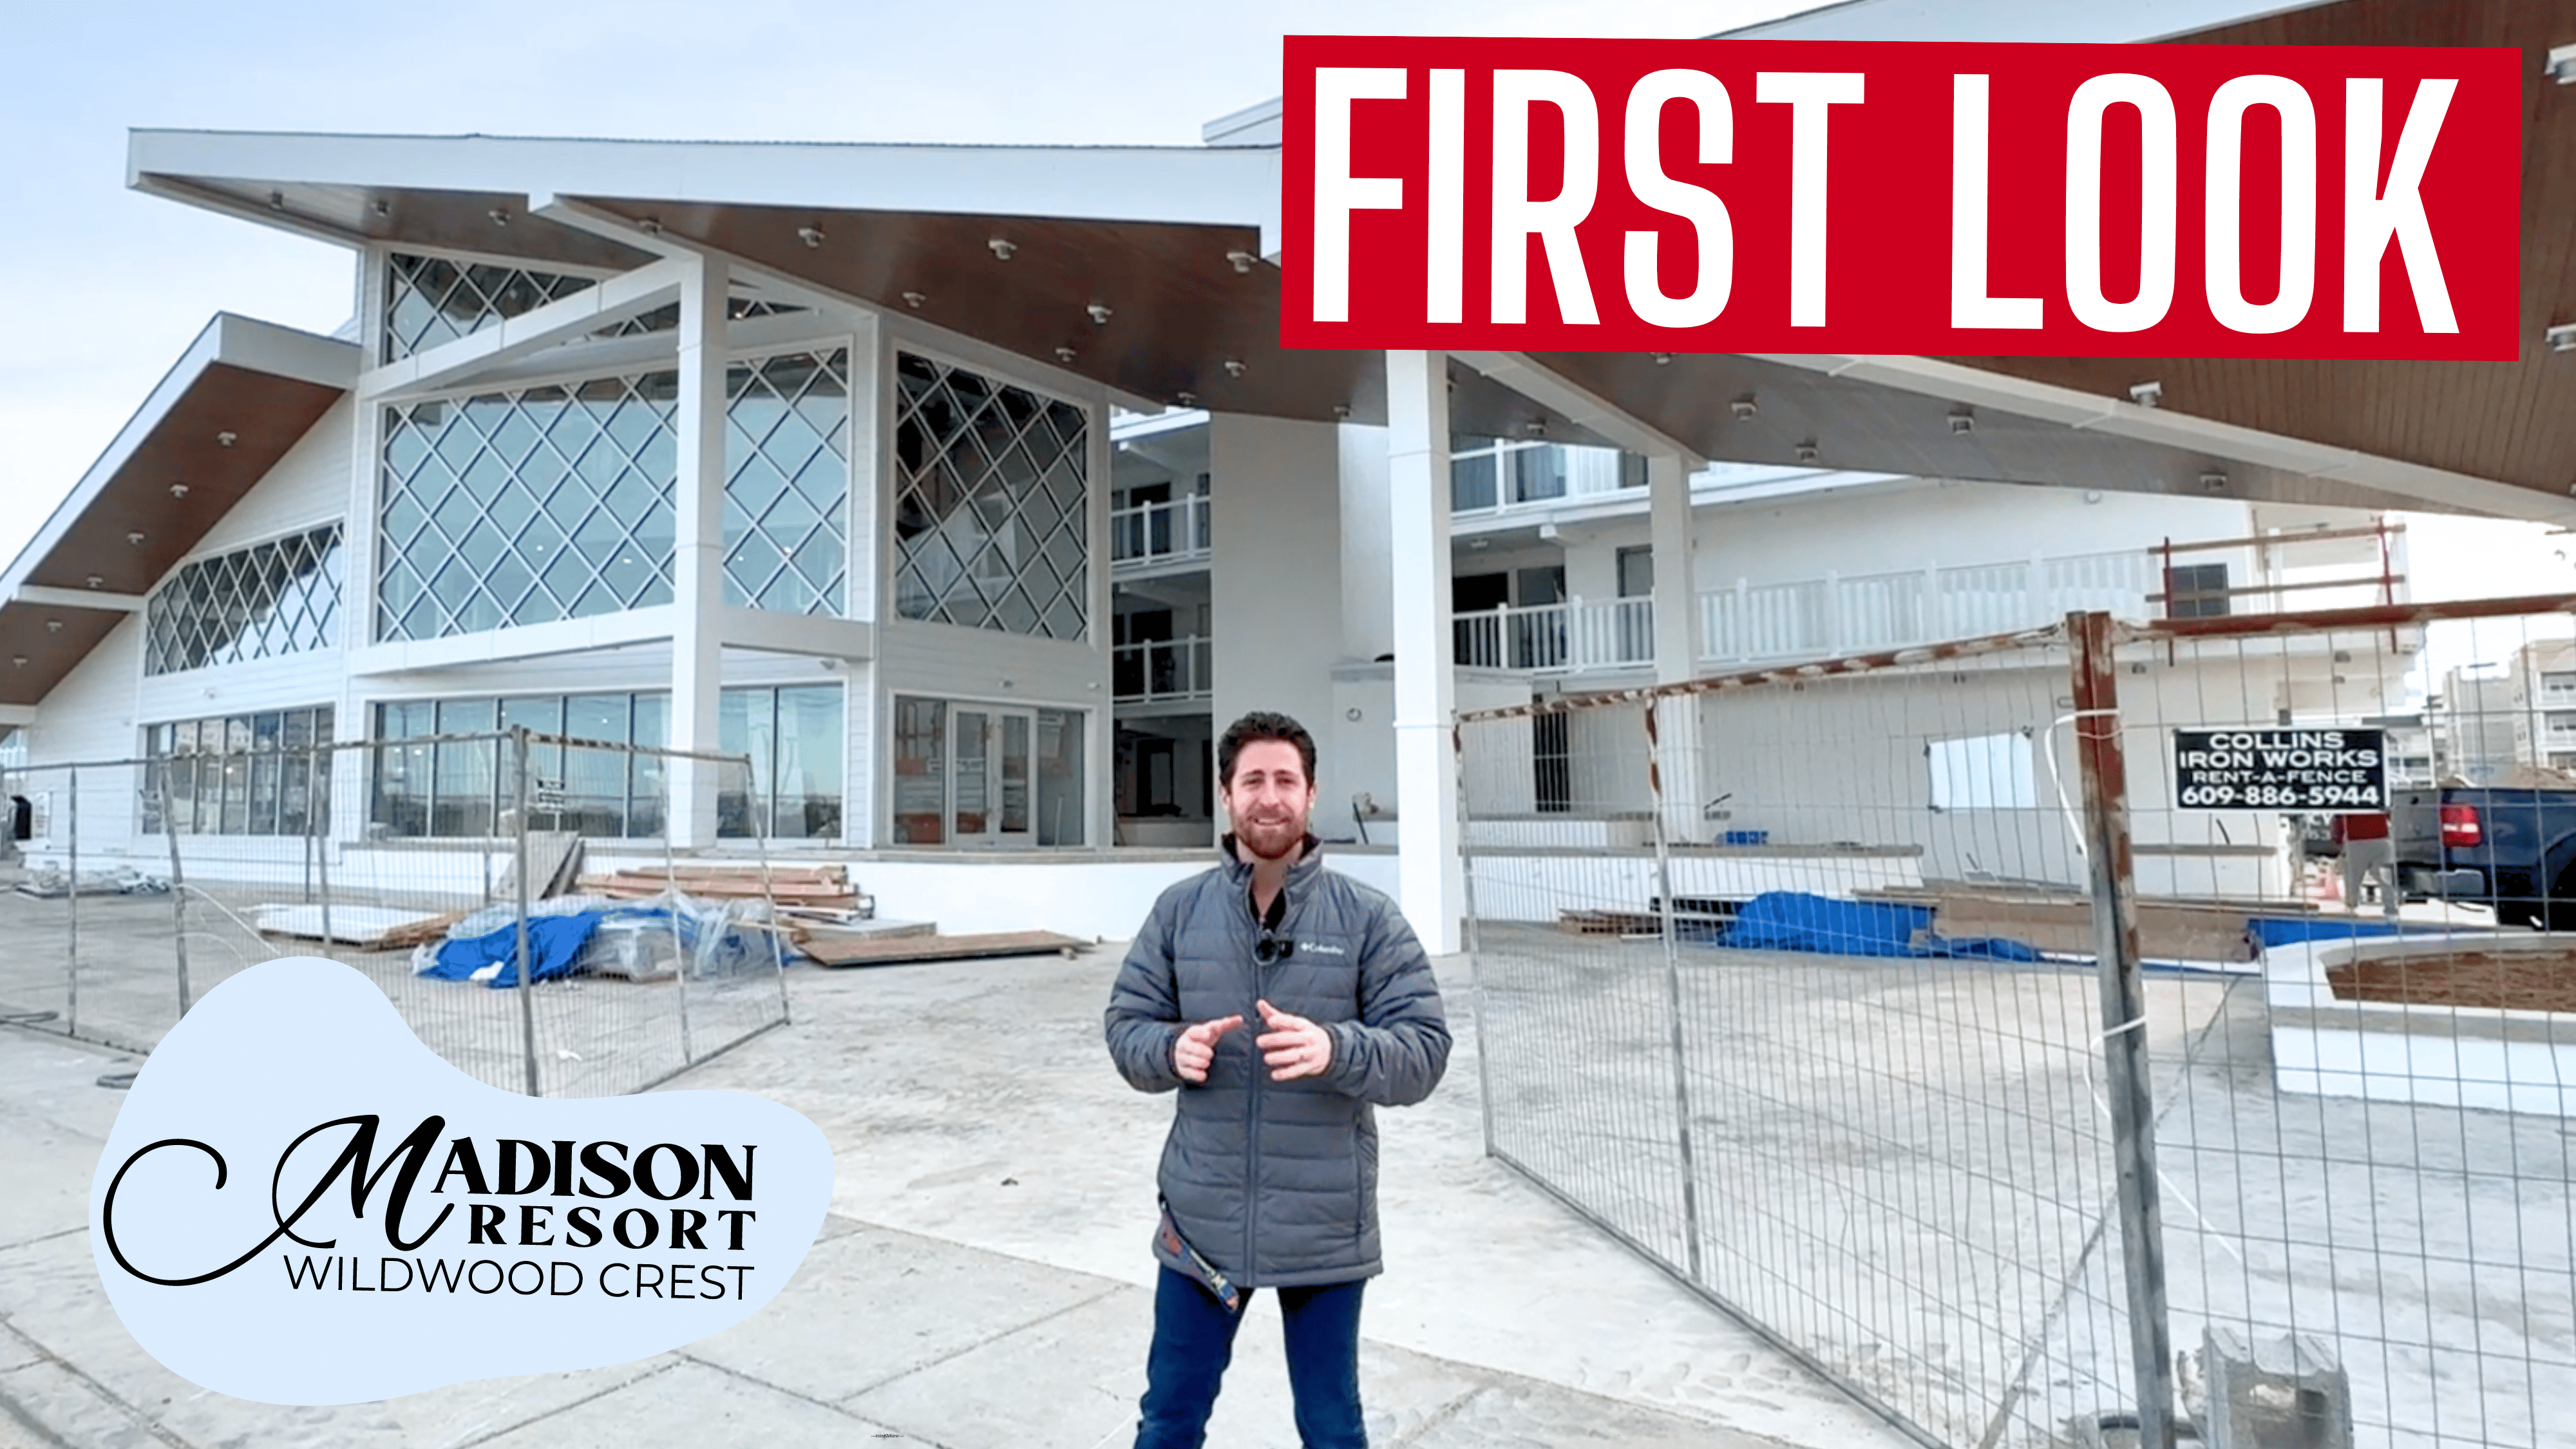 FIRST LOOK Madison Resorts - Construction Update